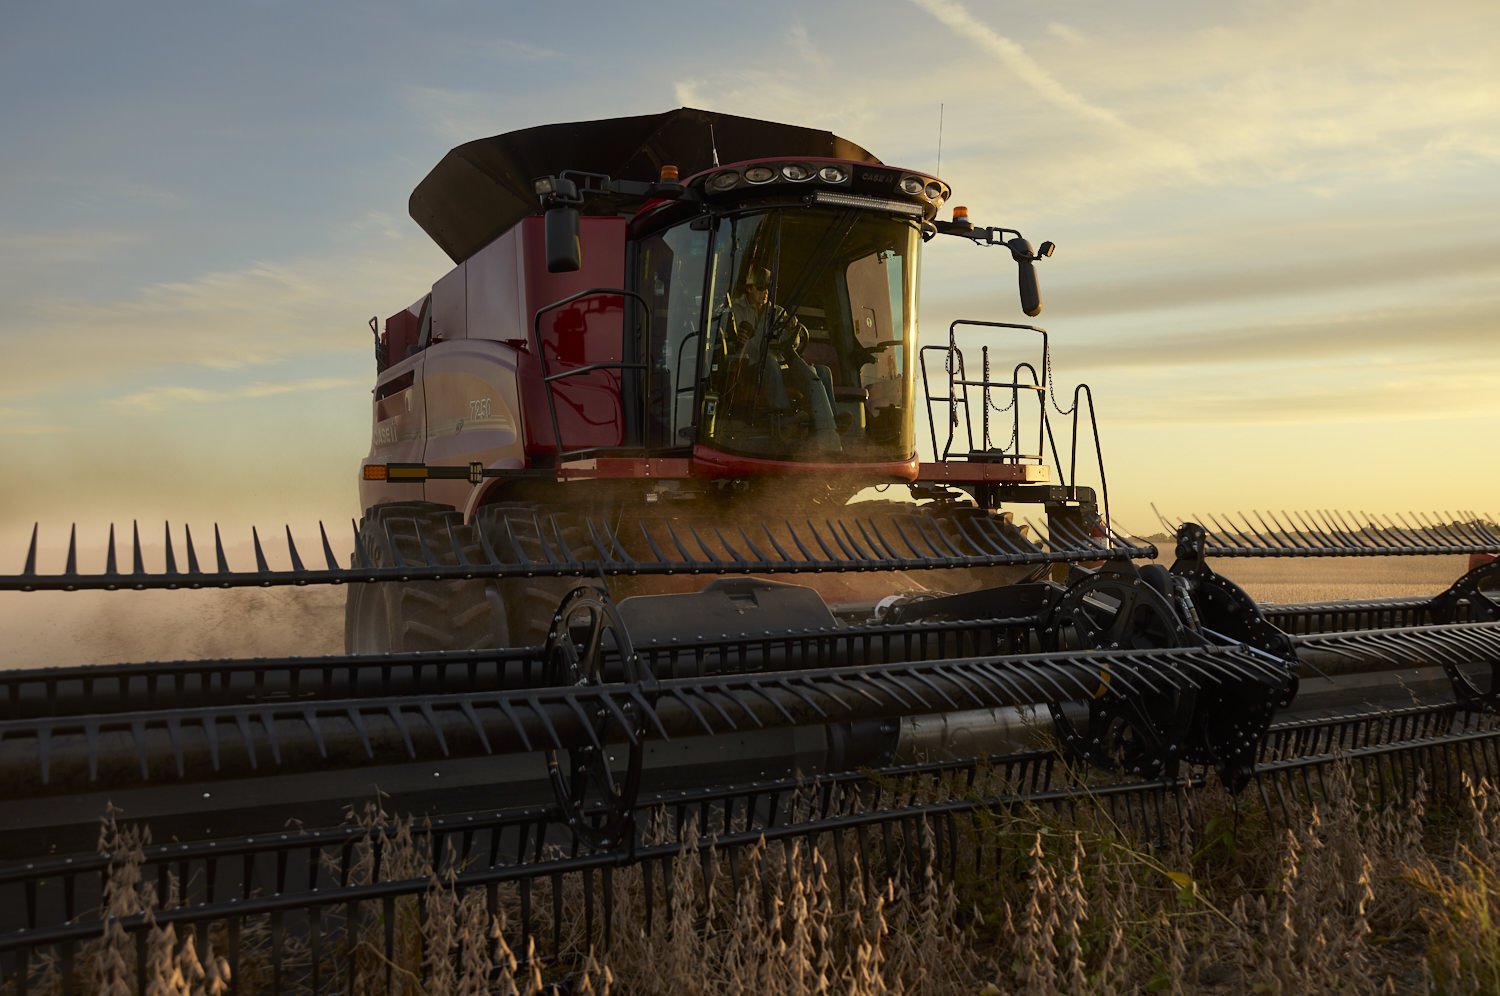  Corn and soybean harvest in Illinois 